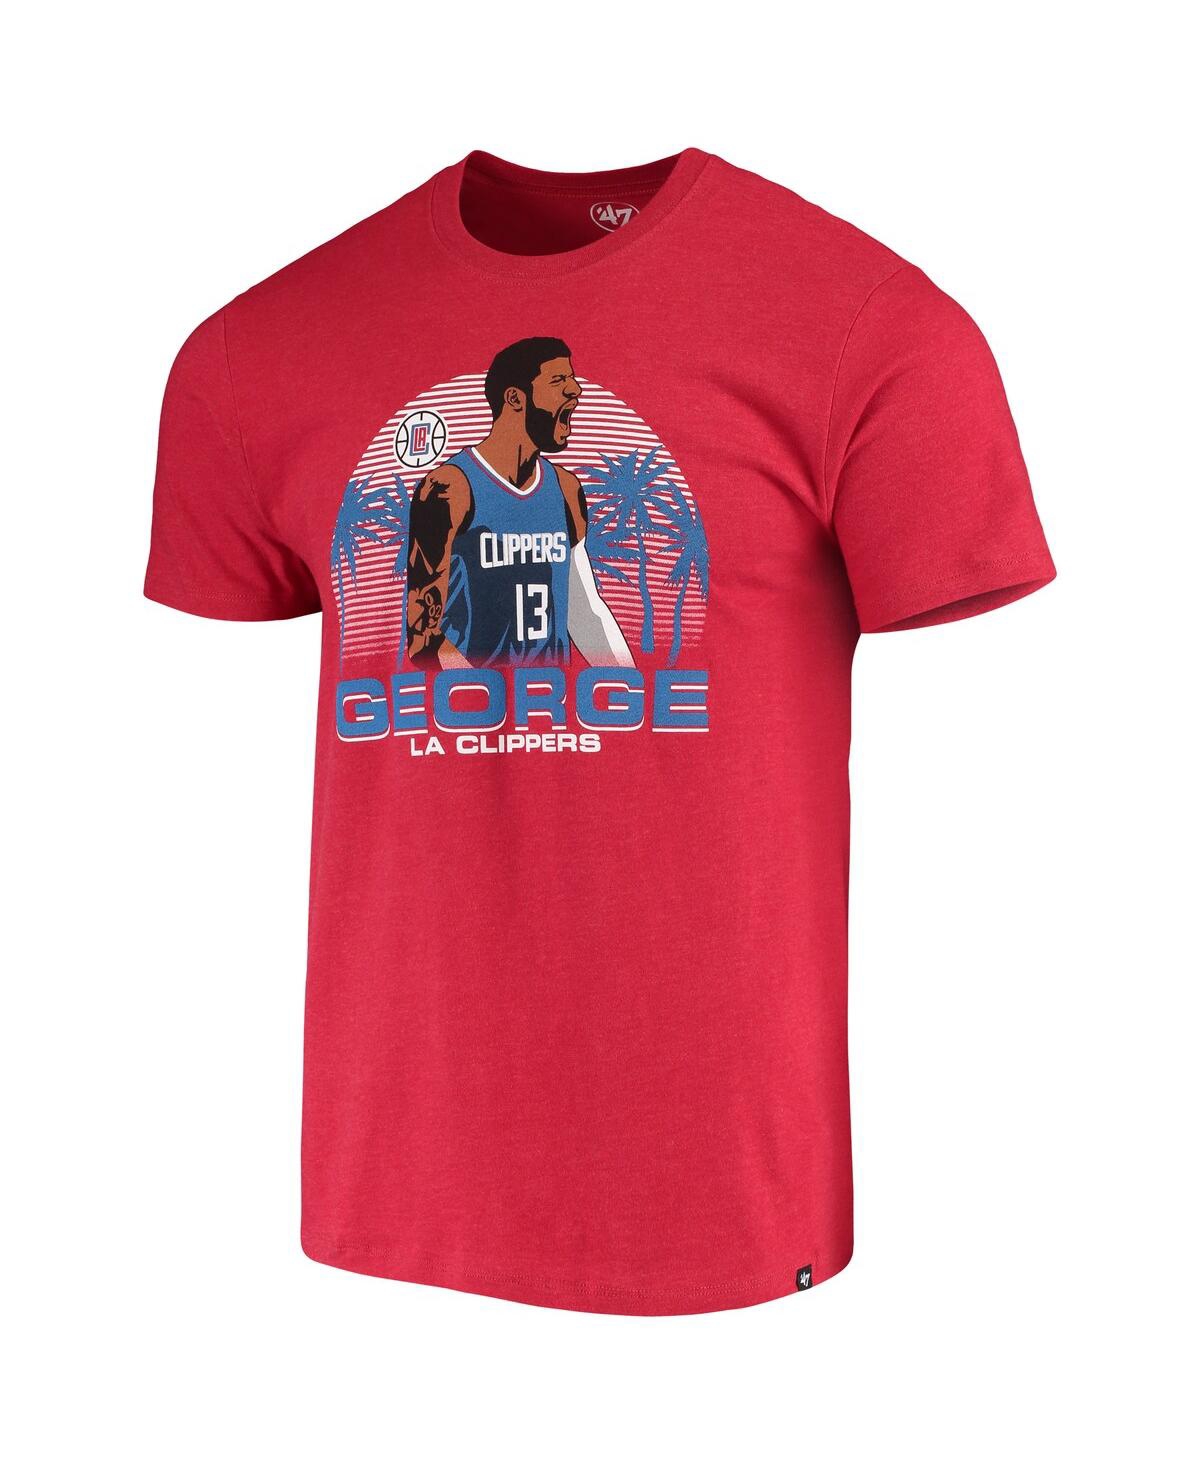 Shop 47 Brand Men's Paul George Red La Clippers Player Graphic T-shirt